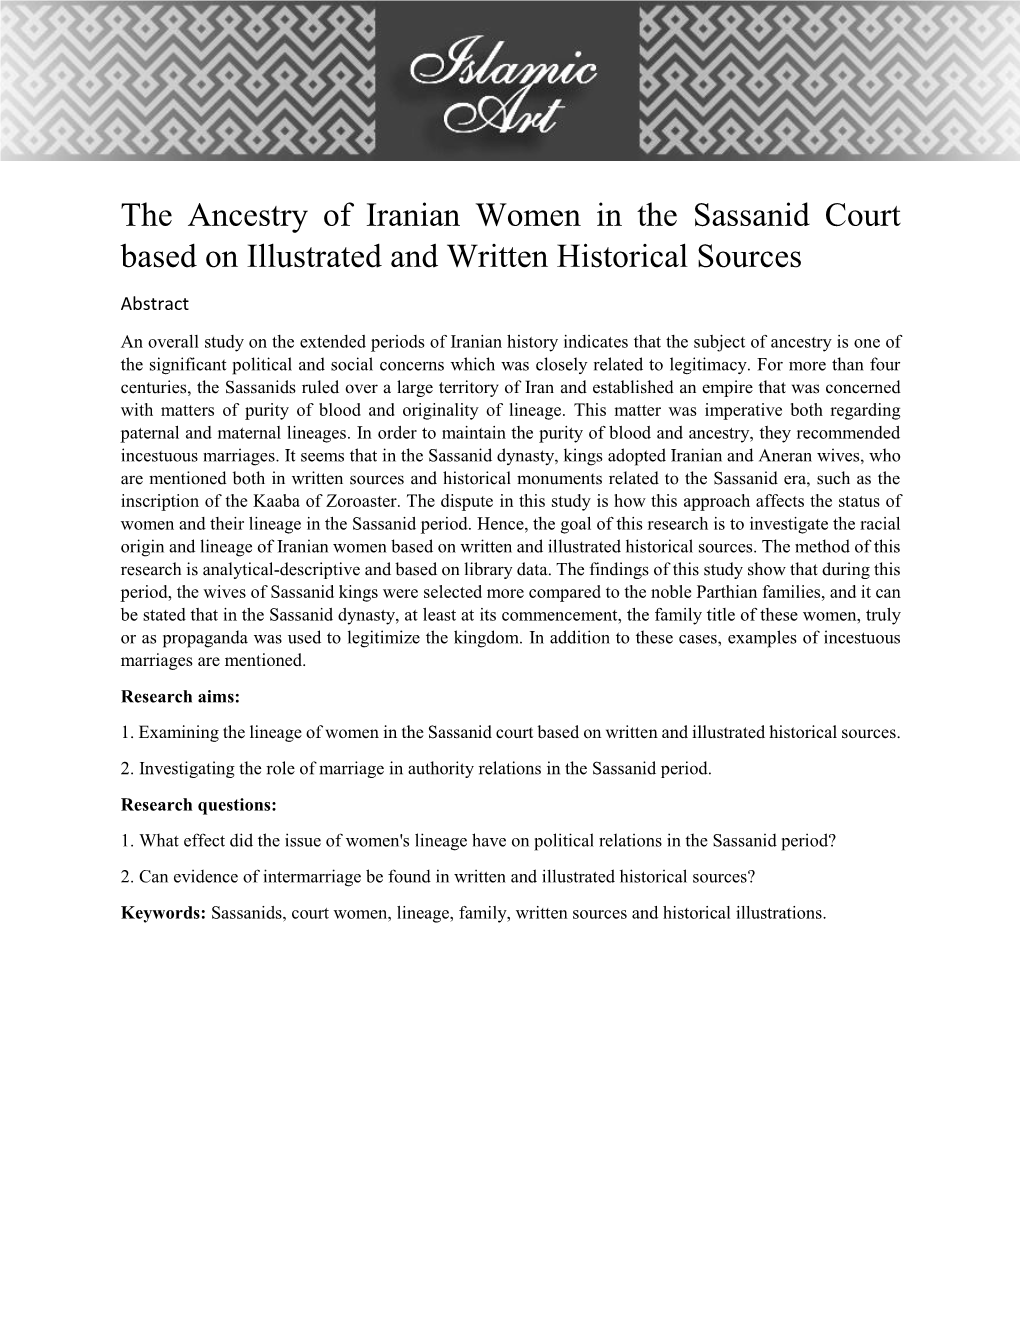 The Ancestry of Iranian Women in the Sassanid Court Based on Illustrated and Written Historical Sources